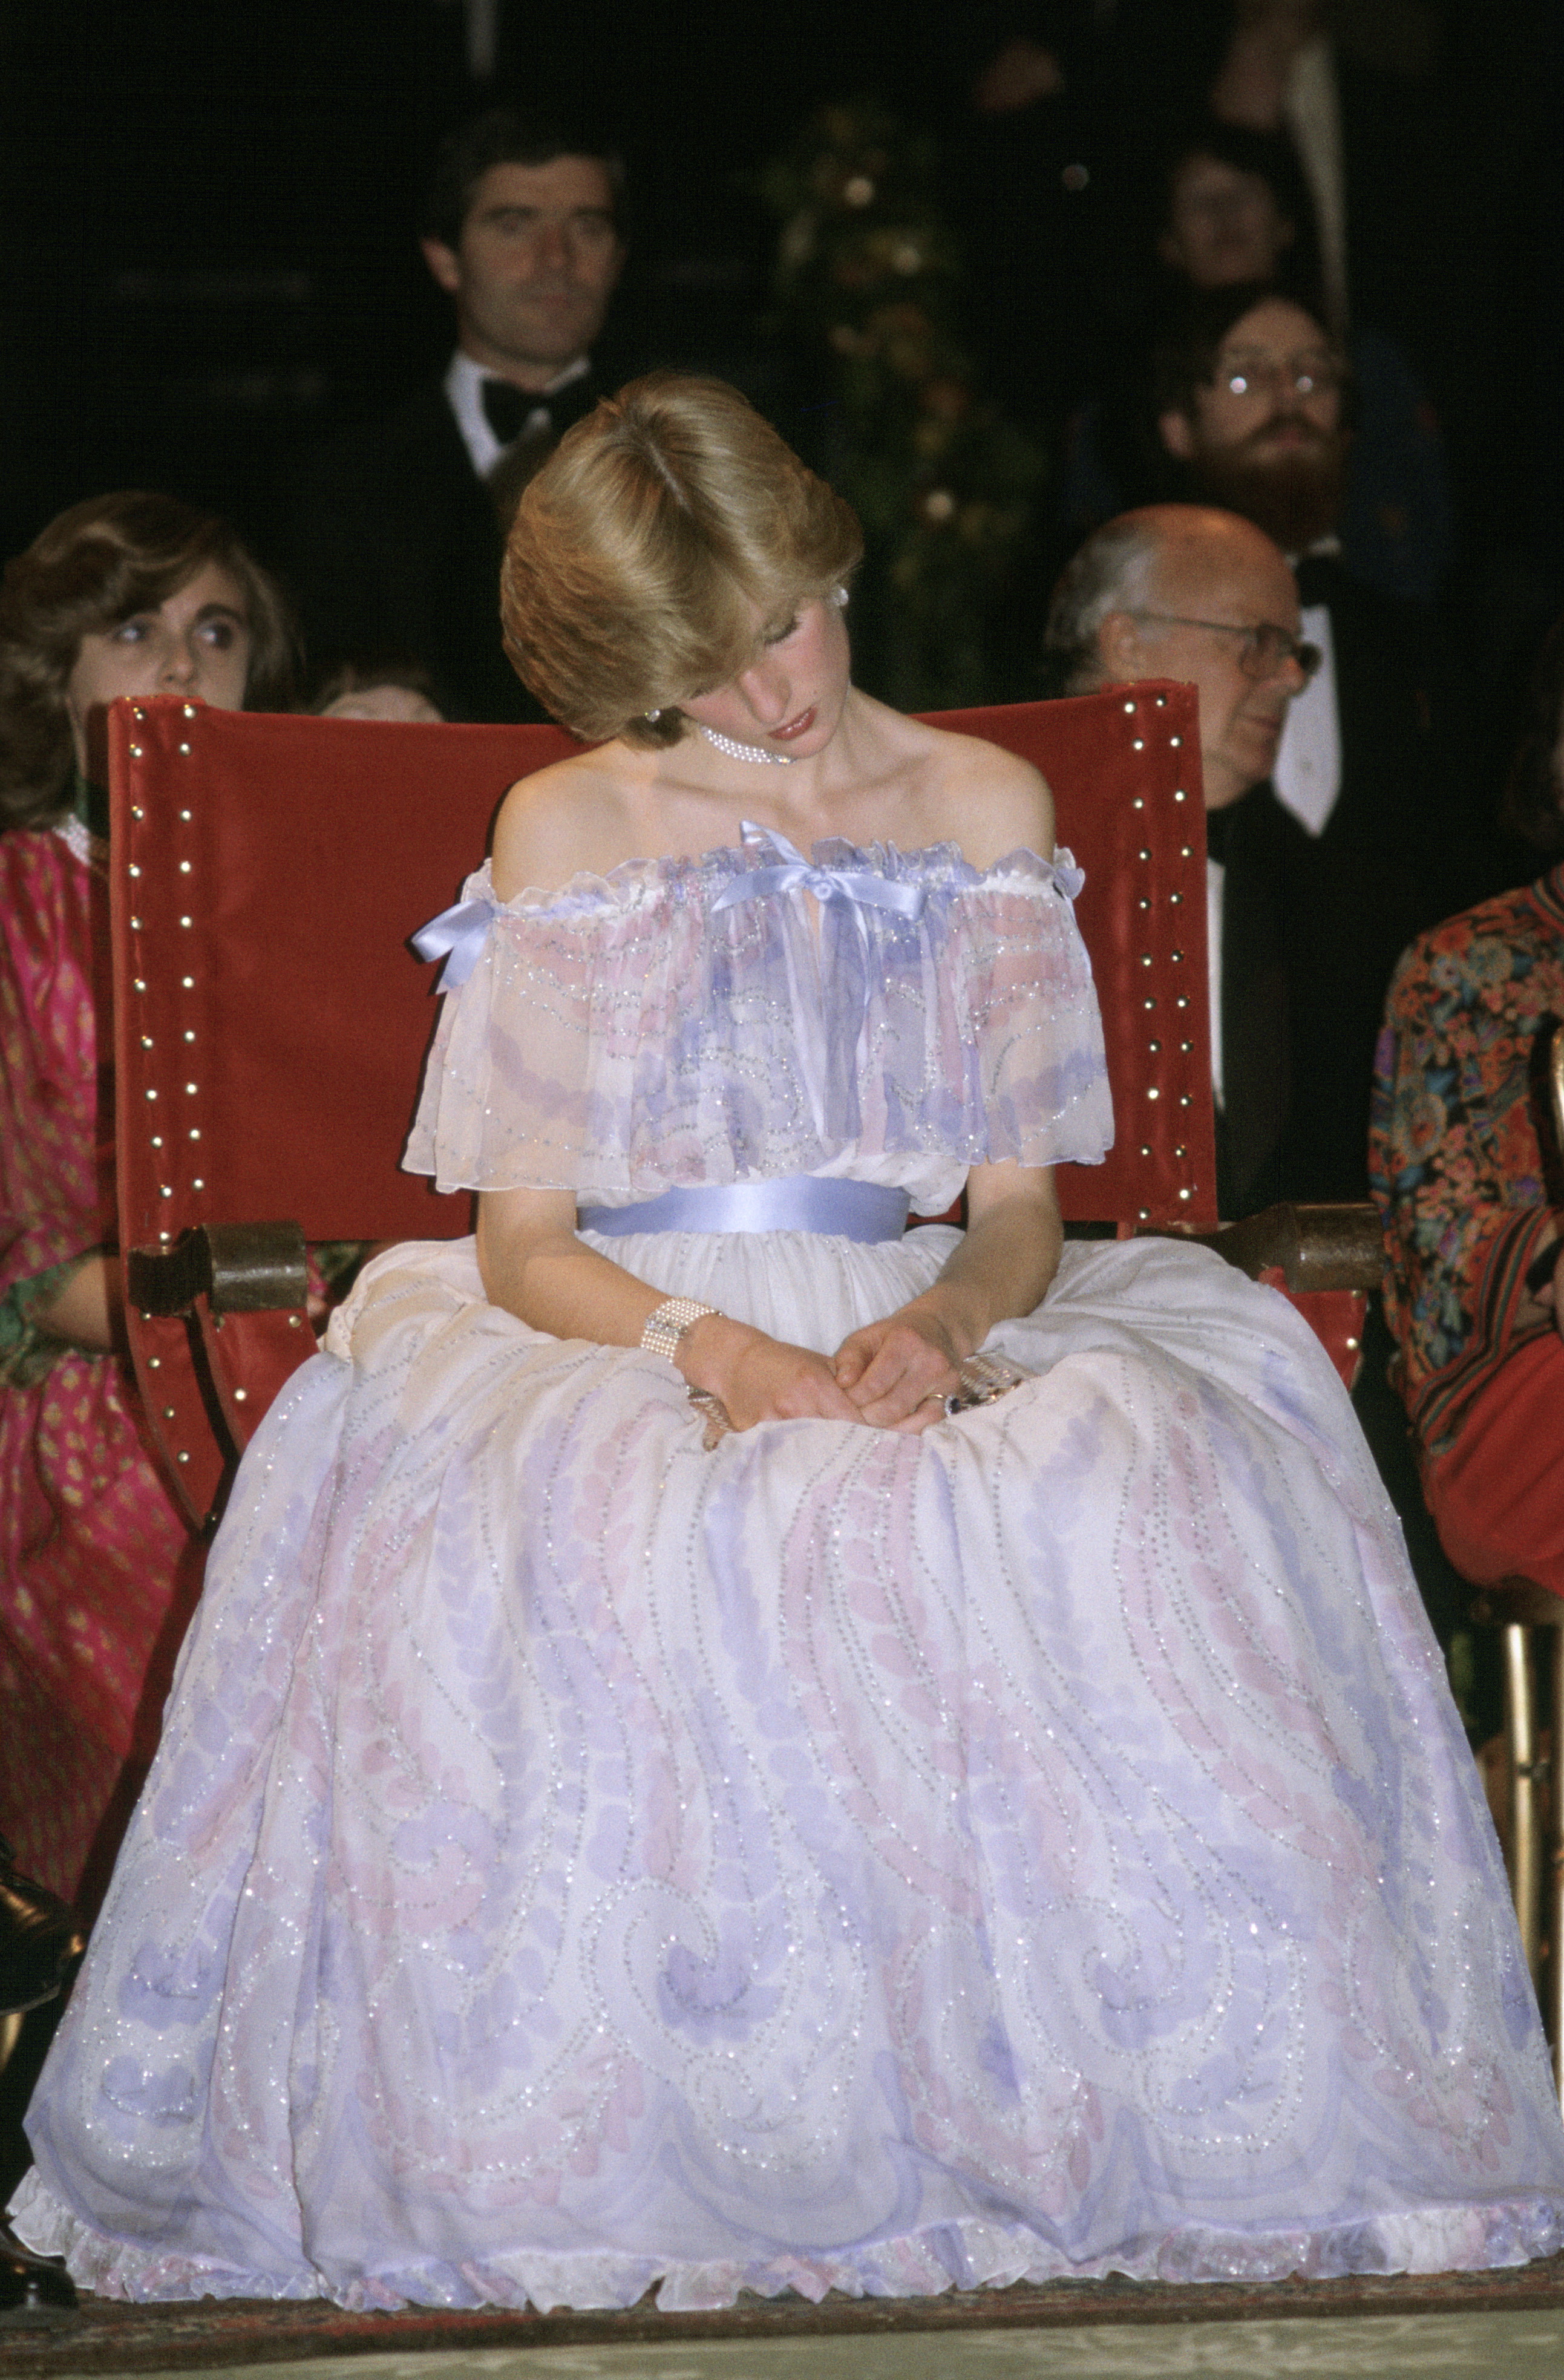 a portrait of princess diana napping sitting in a lilac ball gown